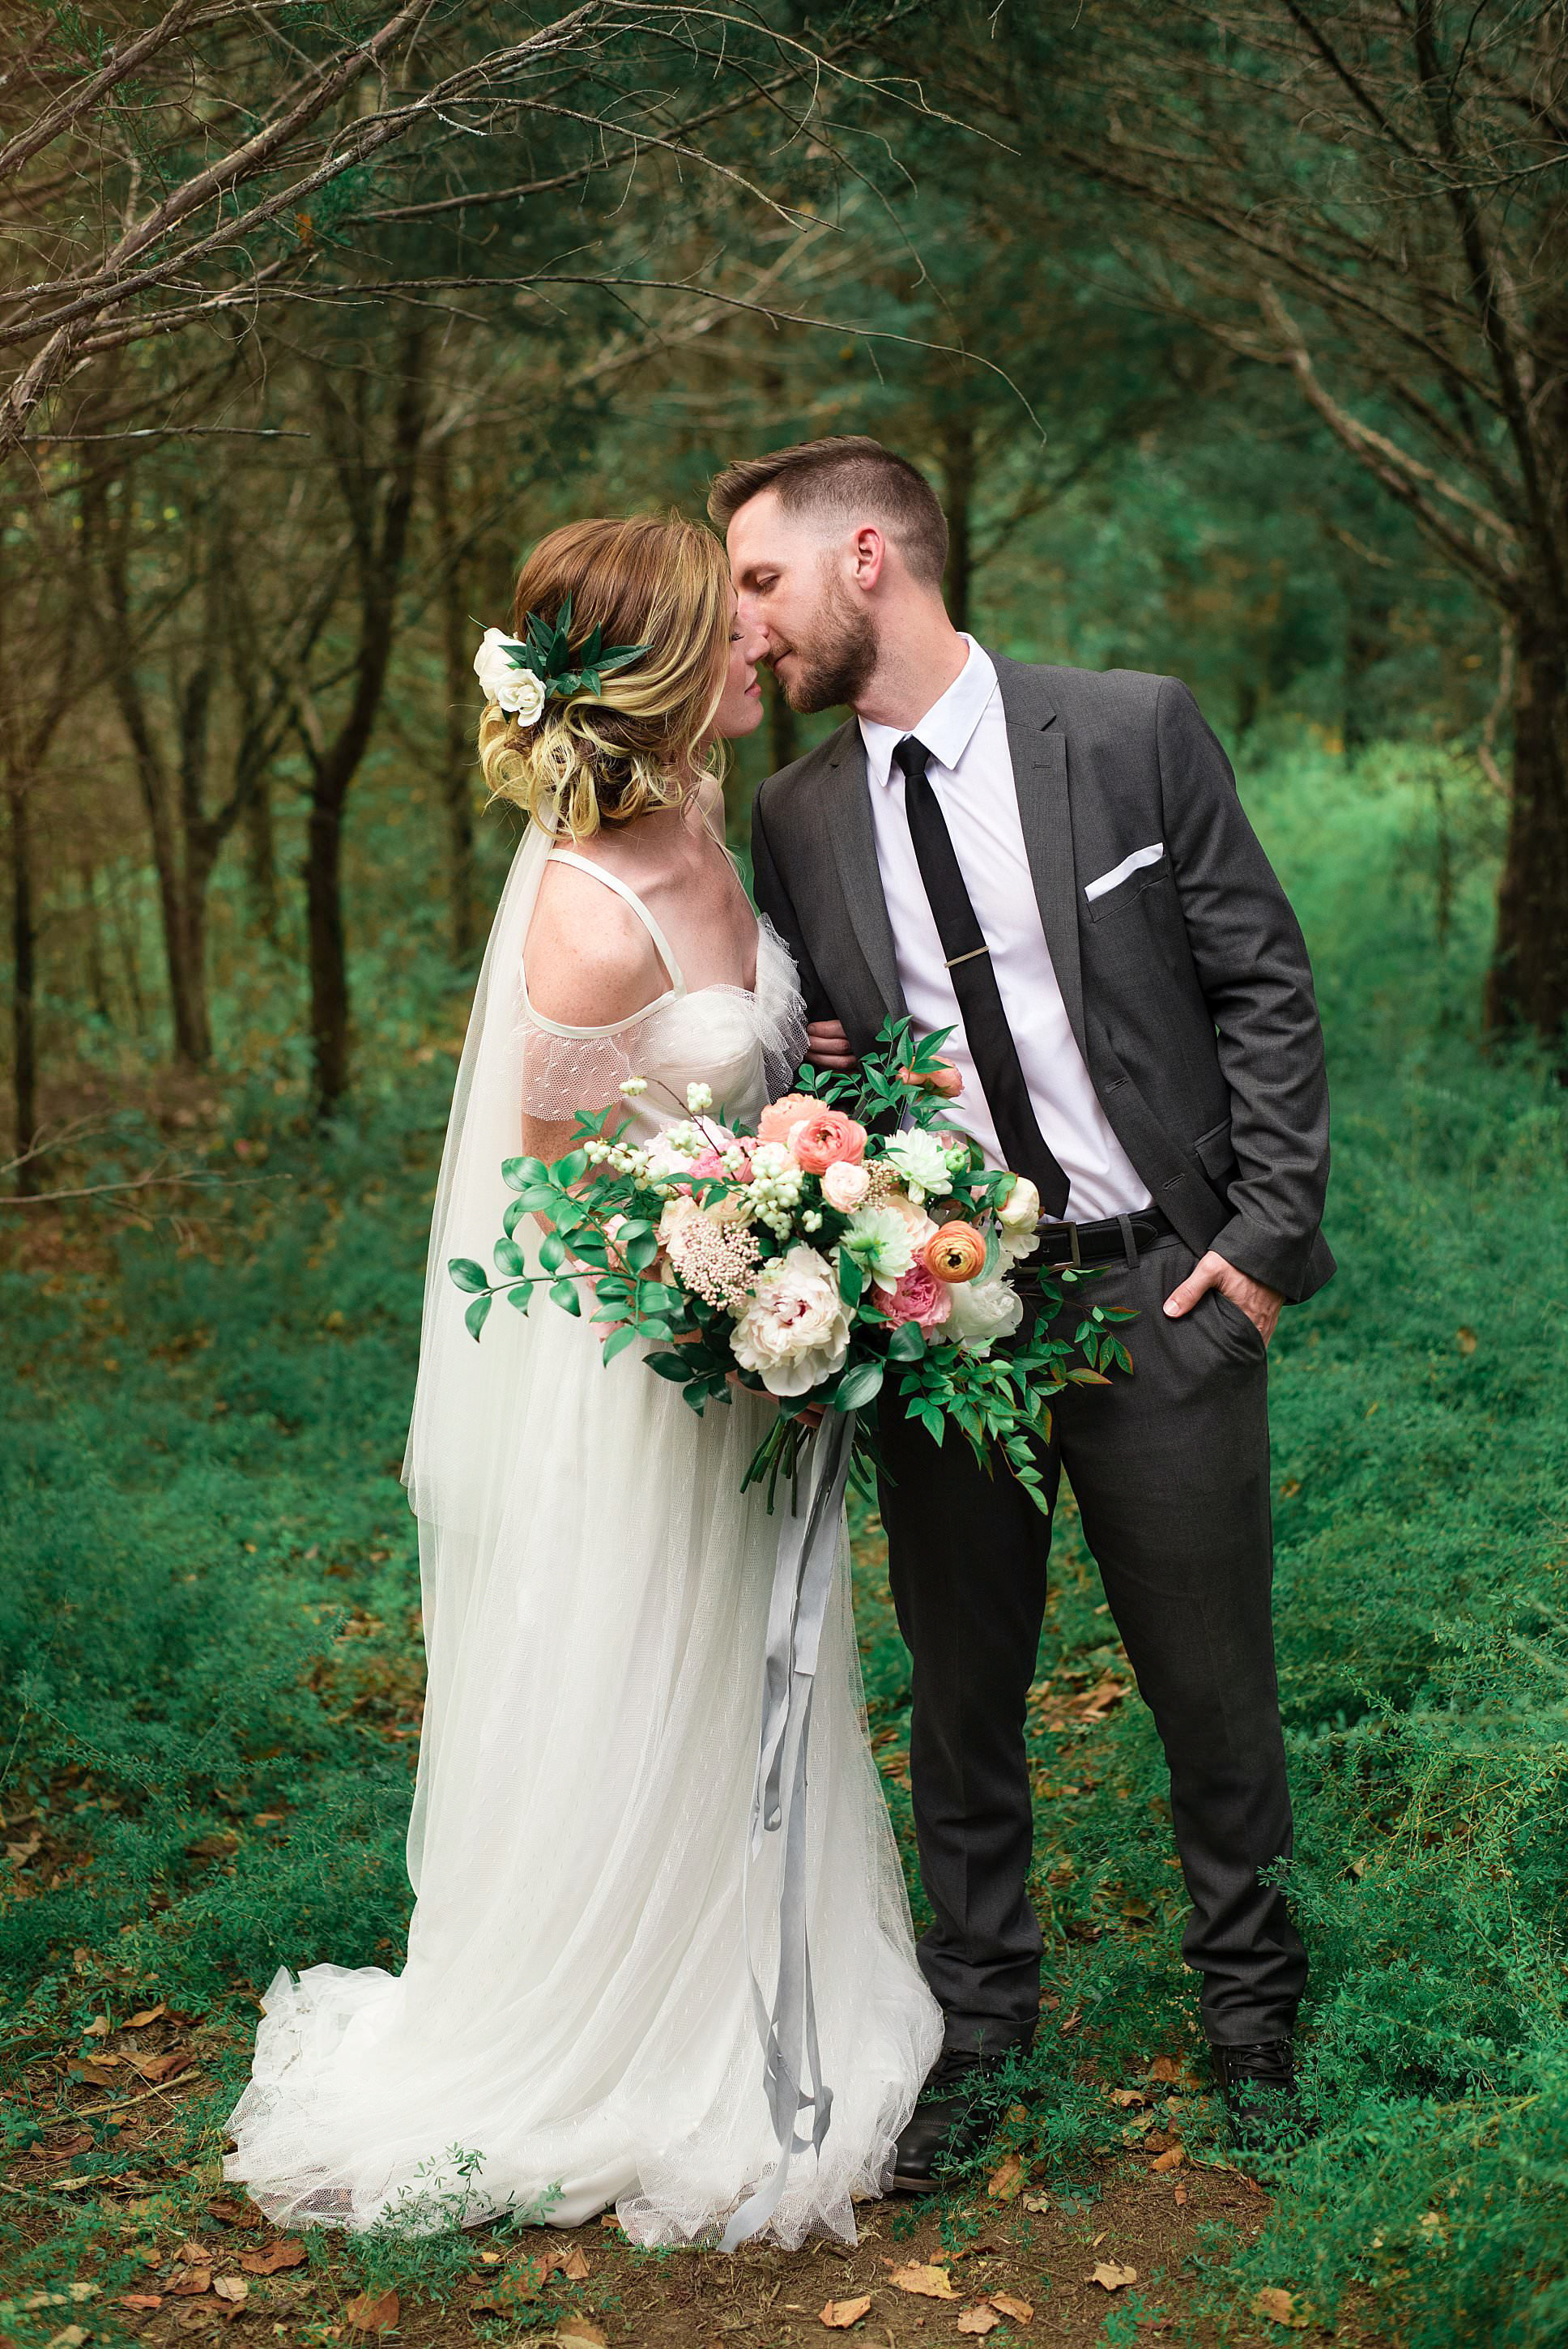 Bride and groom portrait in forest area at Cedarwood Weddings